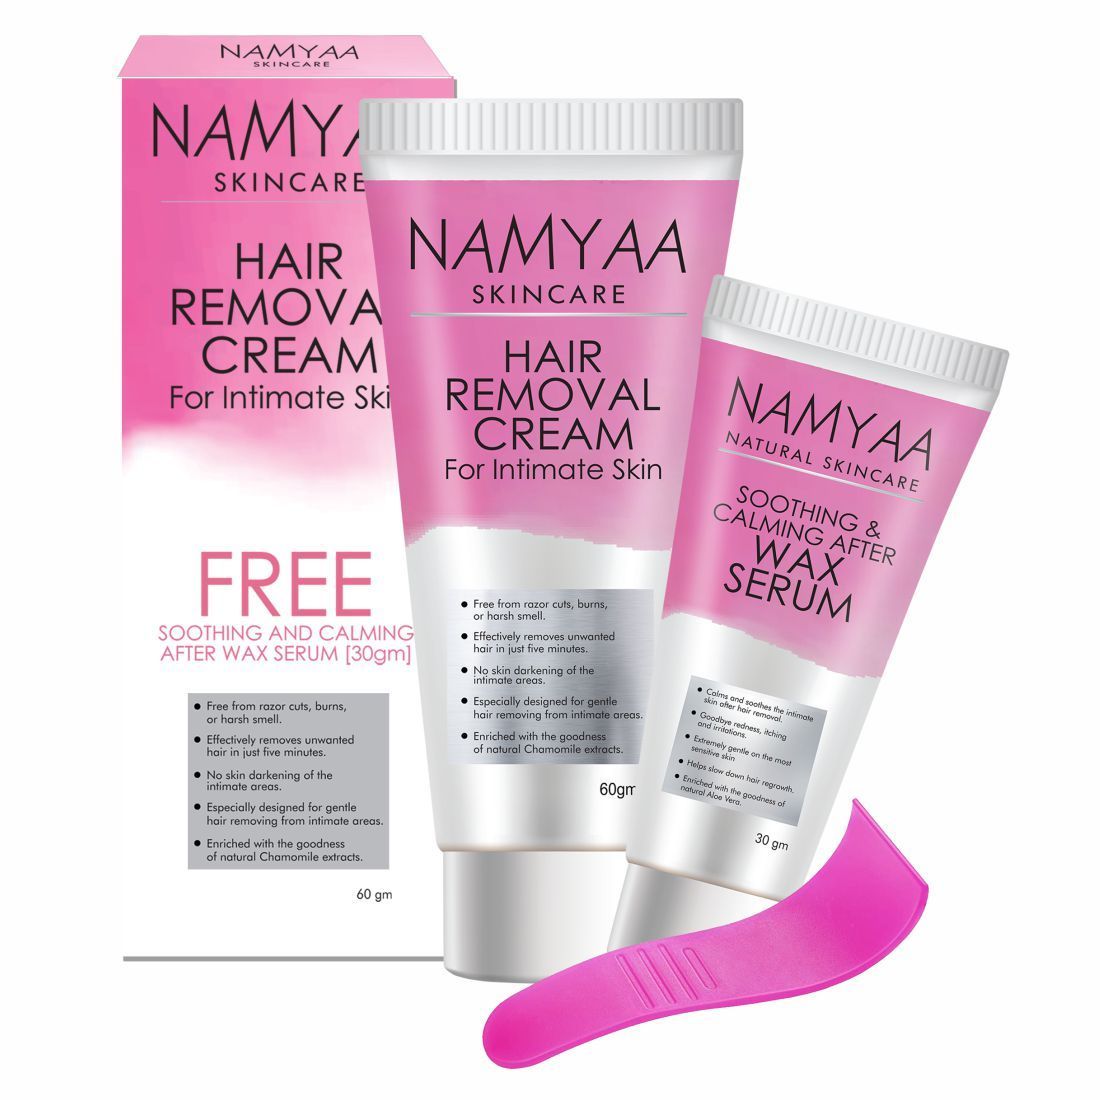 Namyaa Hair Removal Cream for Intimate Skin, 60 gm, Pack of 1 